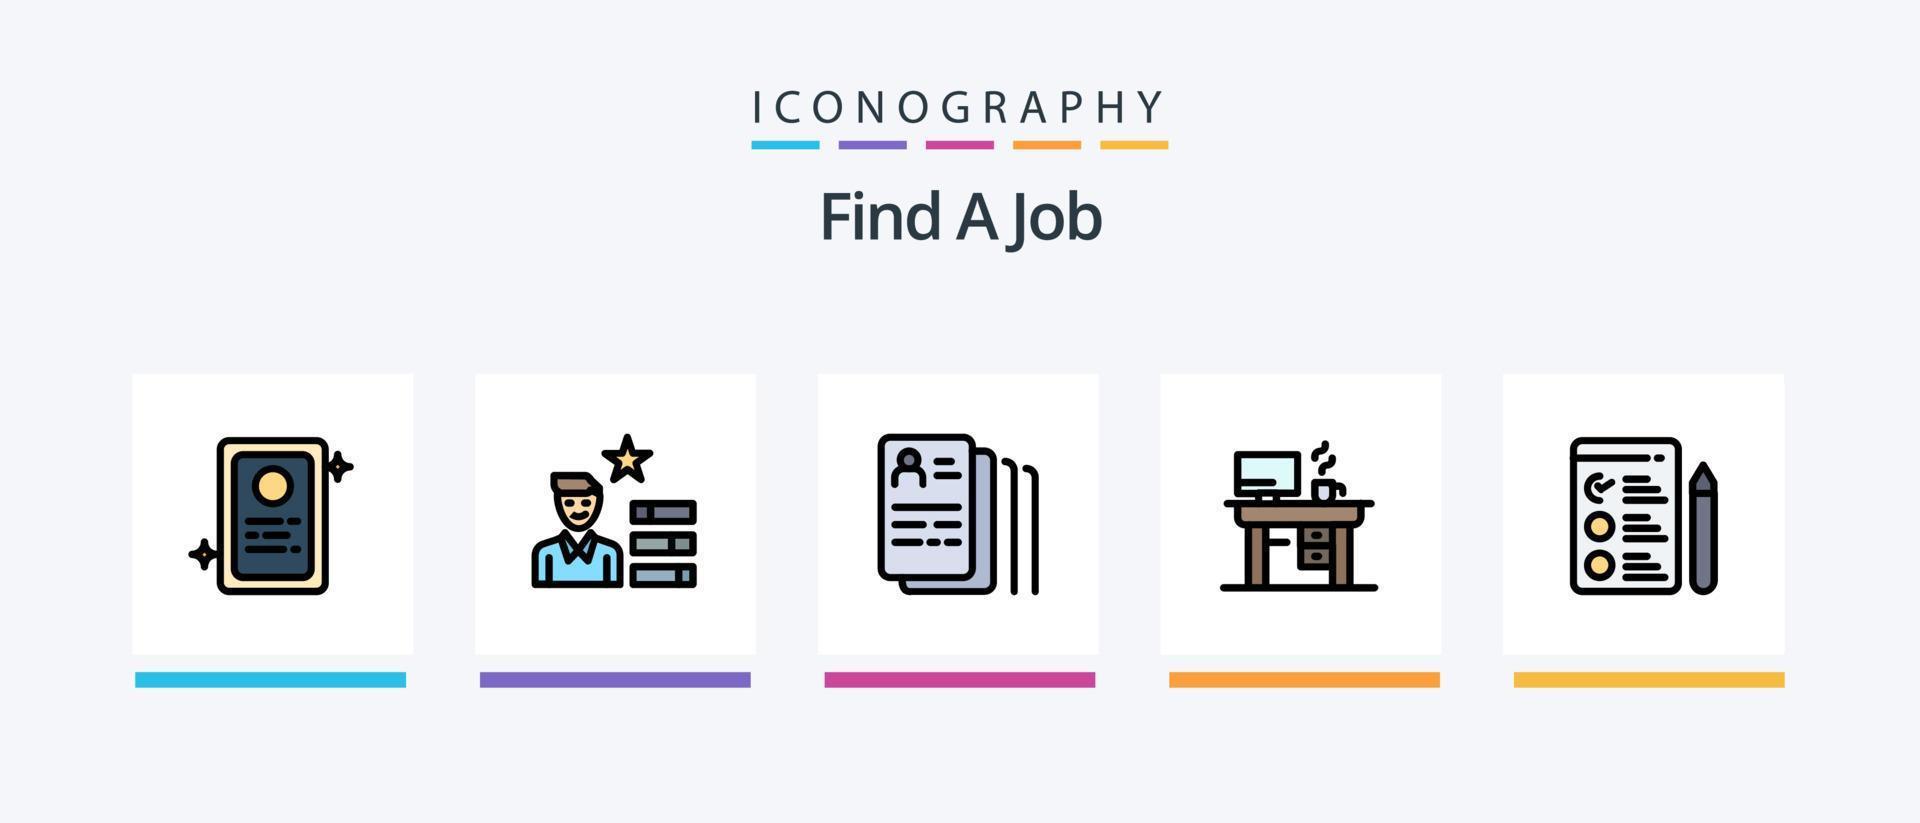 Find A Job Line Filled 5 Icon Pack Including laptop. test. mail. job application. good. Creative Icons Design vector